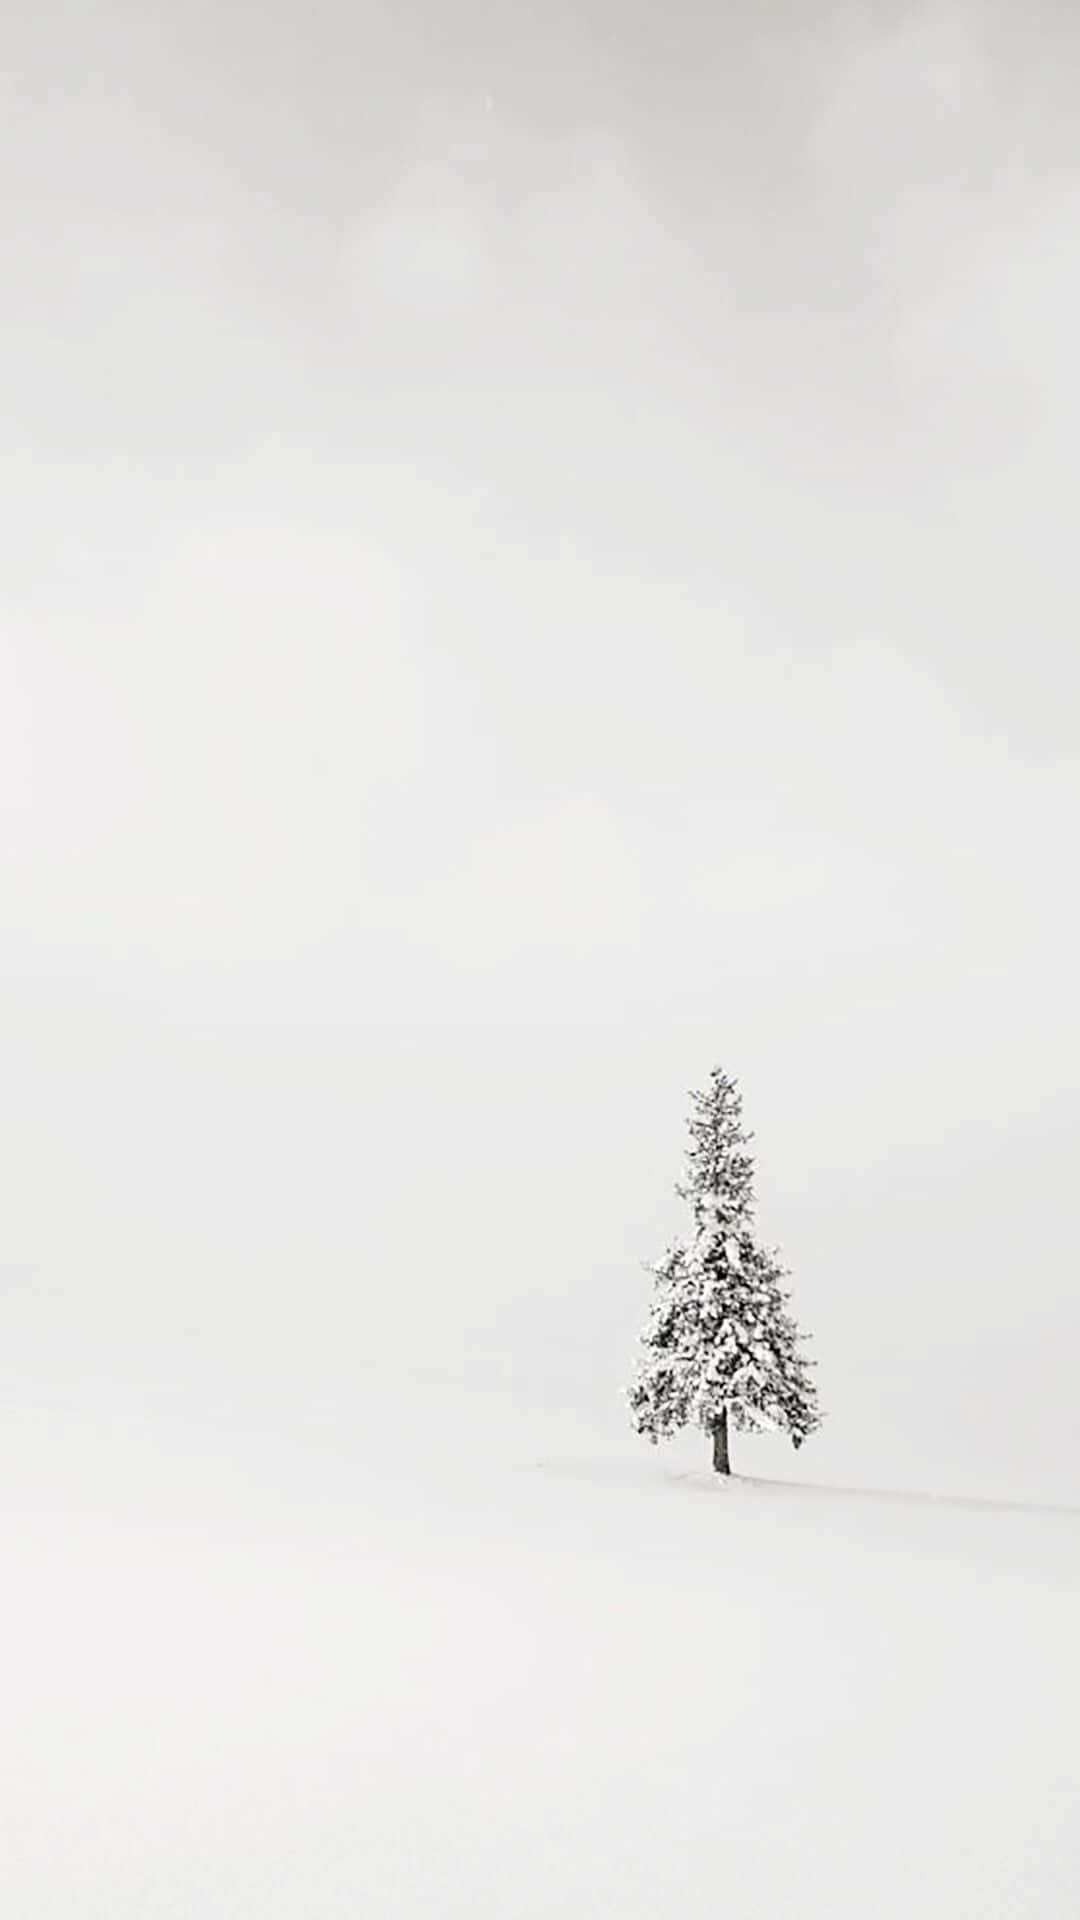 A Single Tree In A Snow Covered Field Background